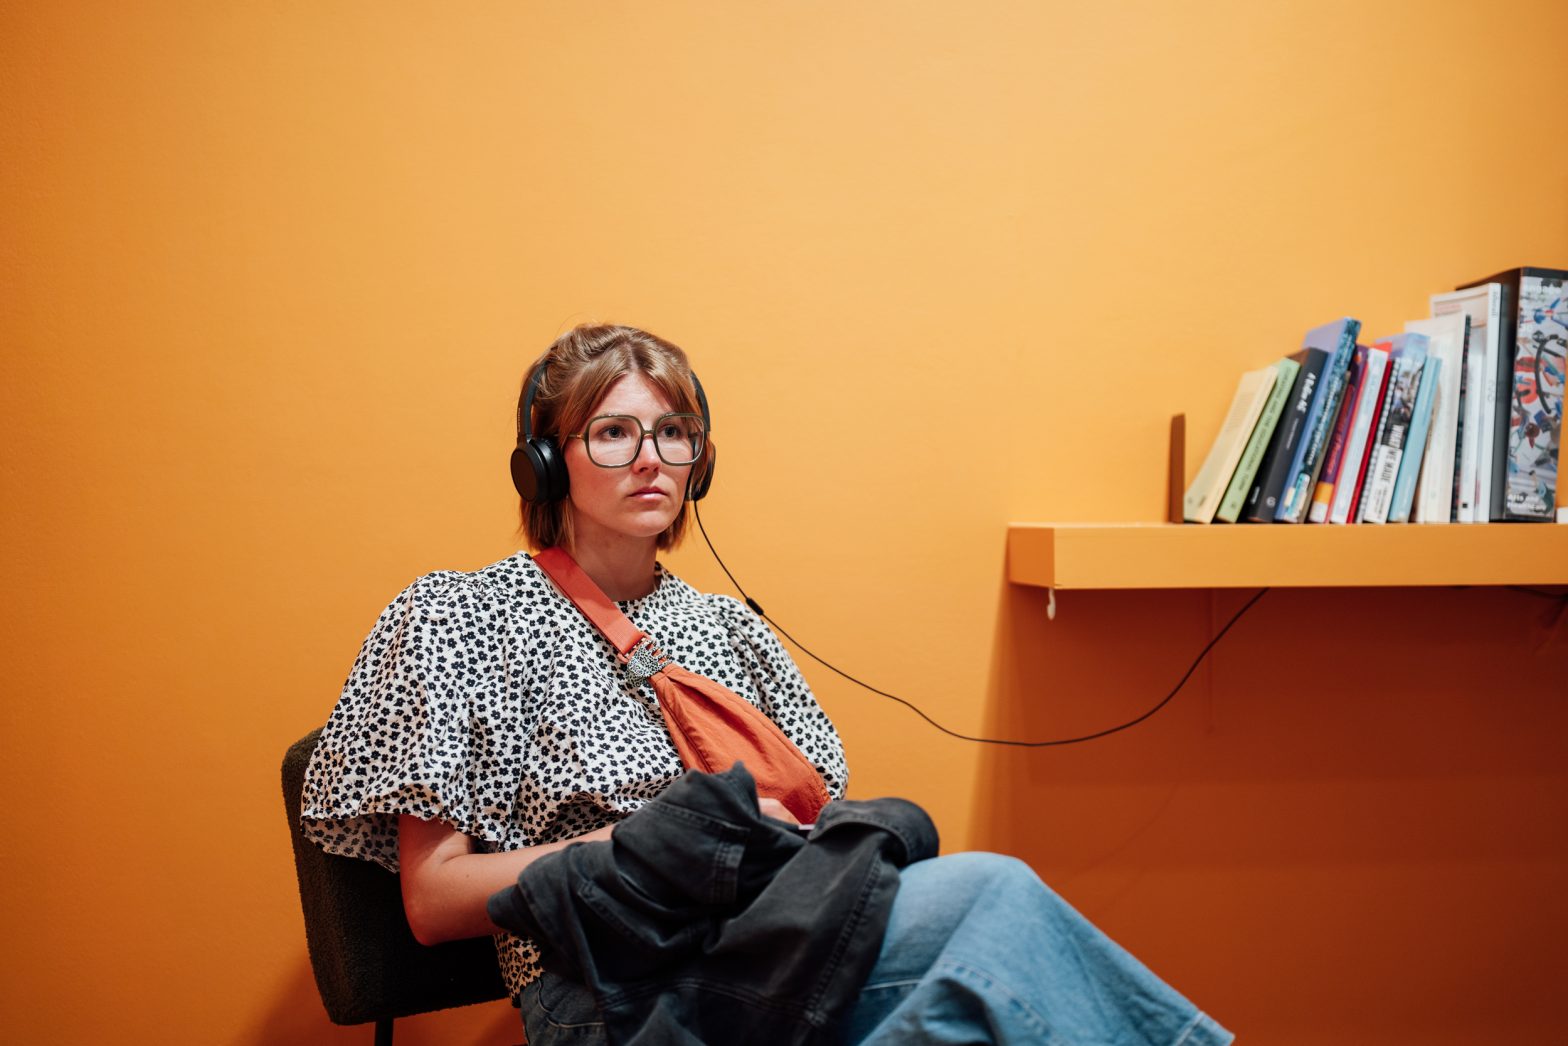 A woman sitting on a chair in front of a orange wall listening to headphones which is attached to a book shelf.